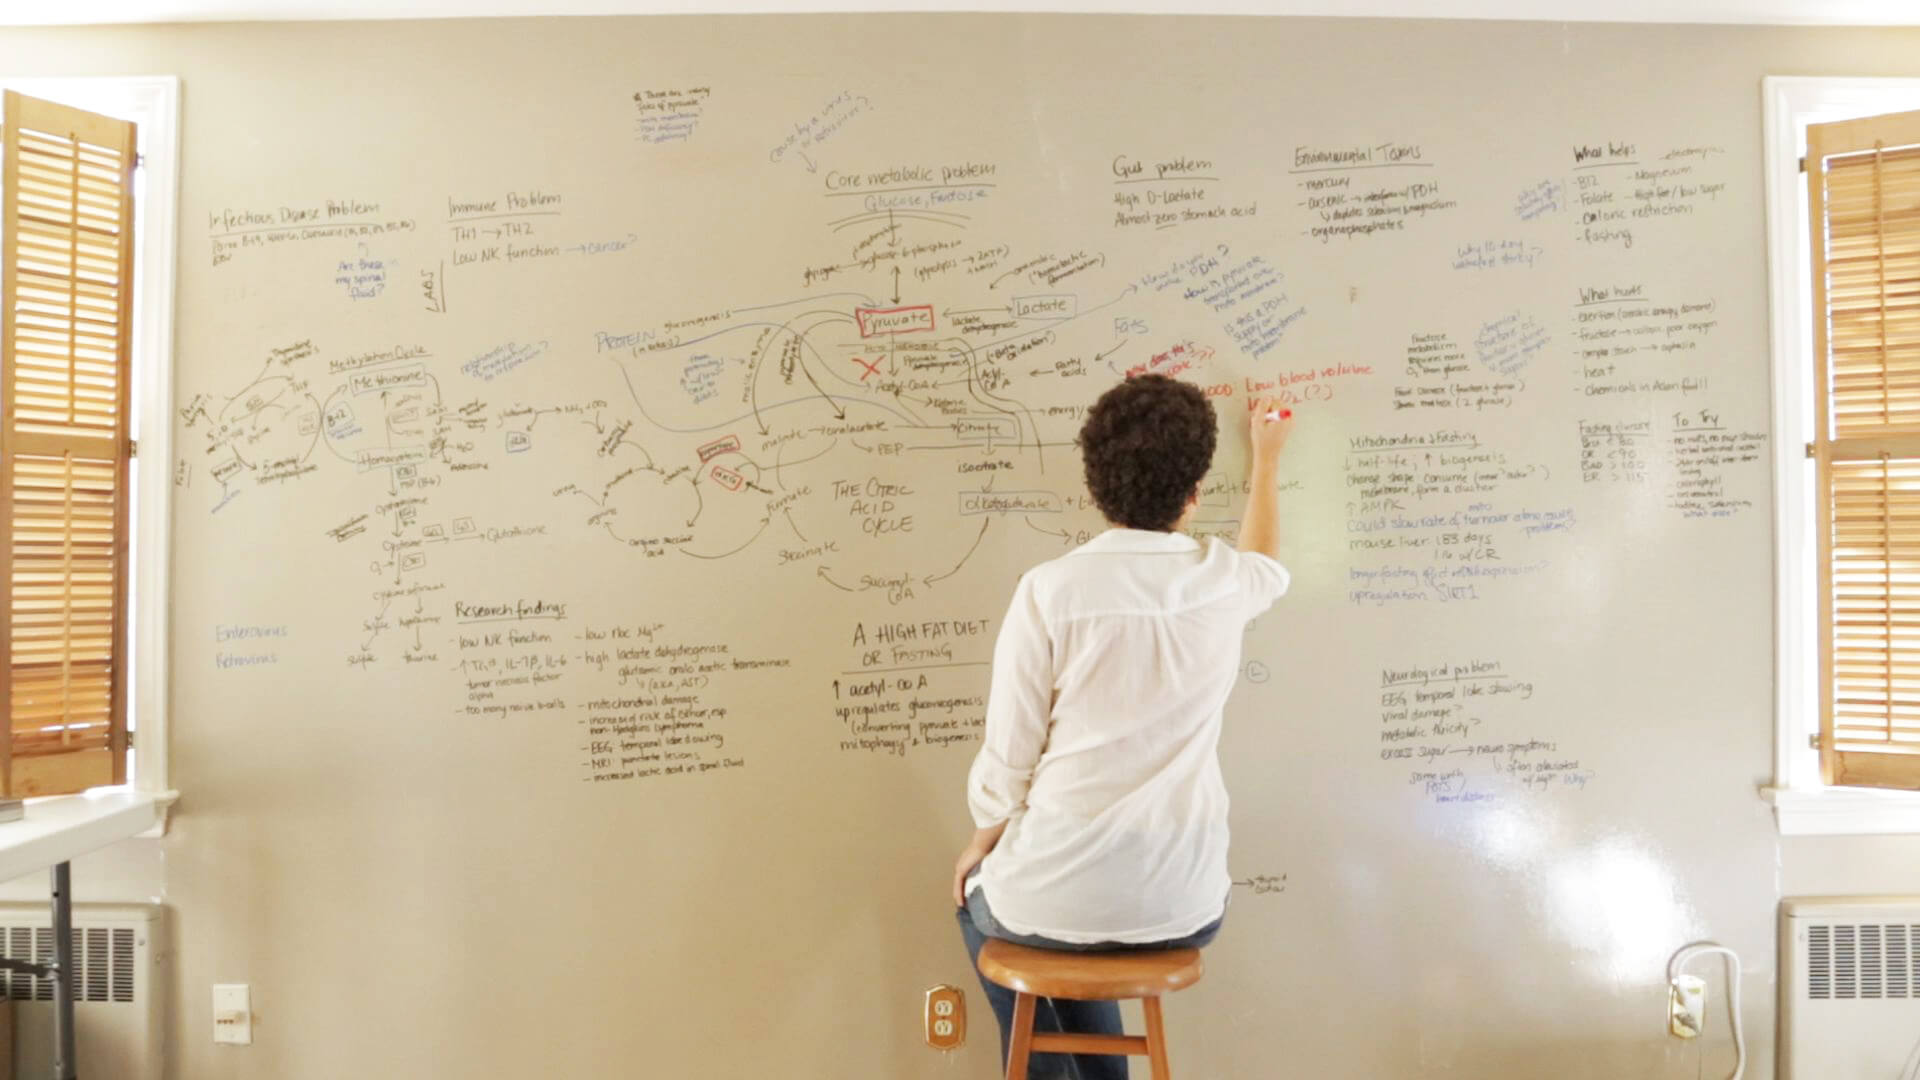 Still form Unrest. A woman sits on a stool facing a wall with a whiteboard full of writing.